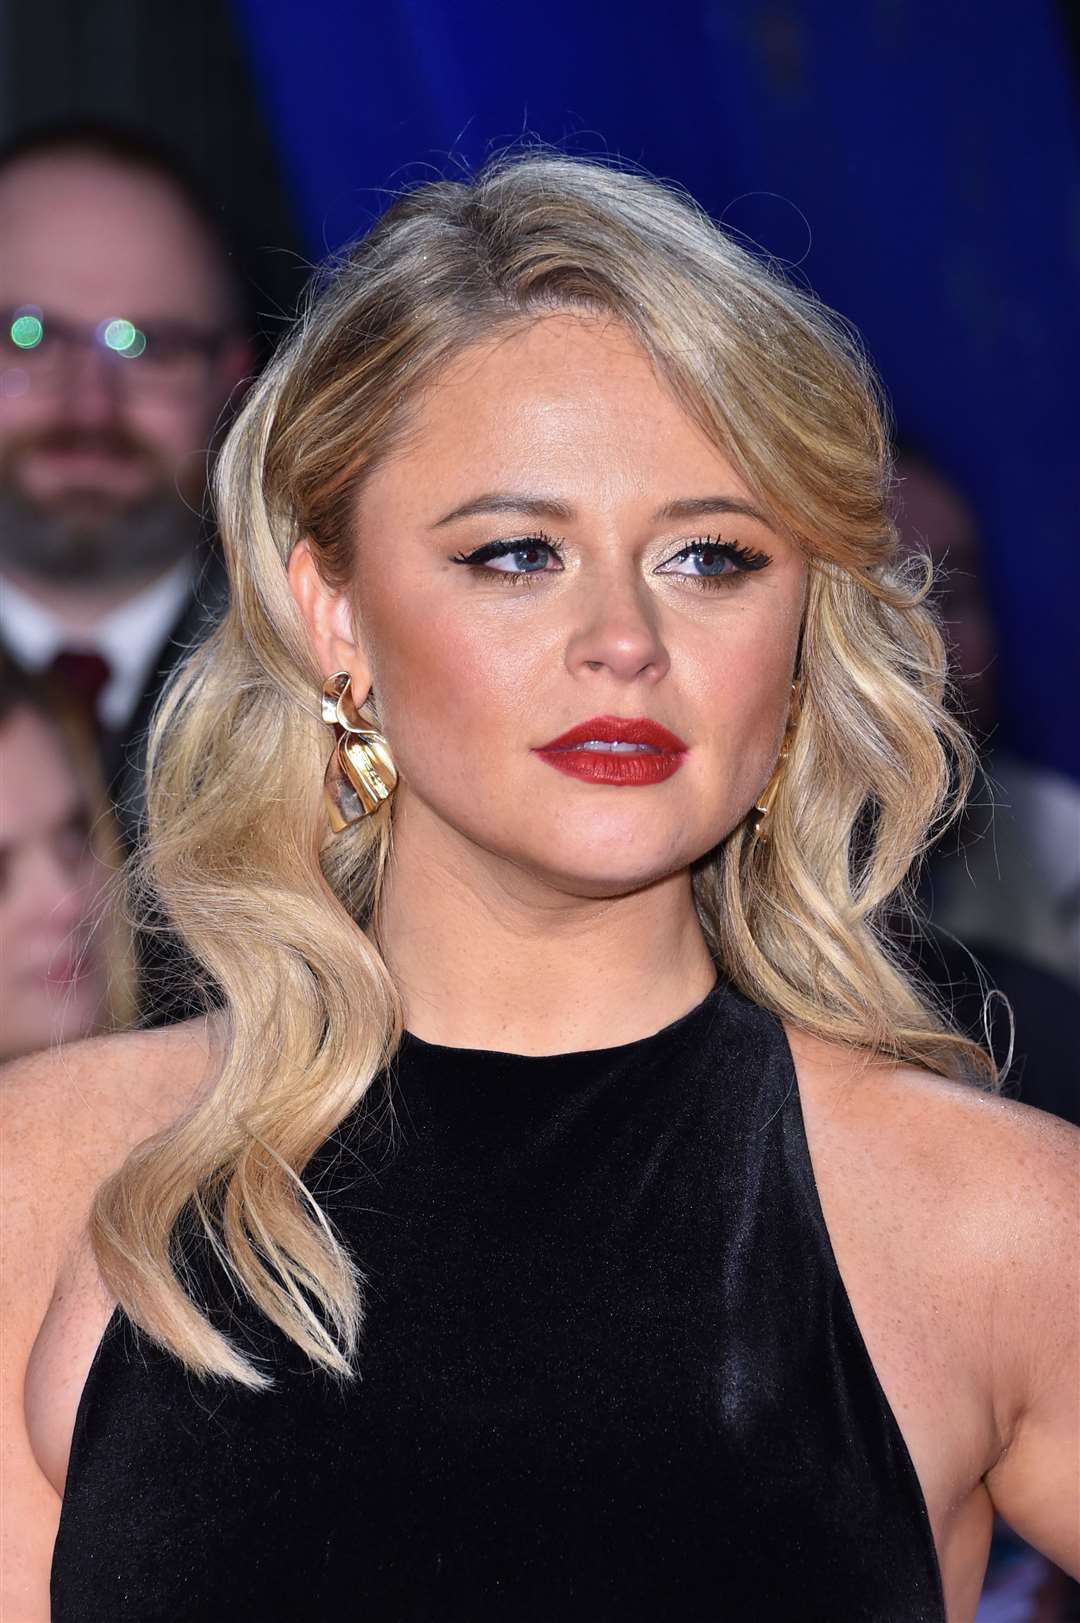 Actor and TV presenter Emily Atack has spoken out about cyber-flashing and the distress it can cause (Matt Crossick/PA)